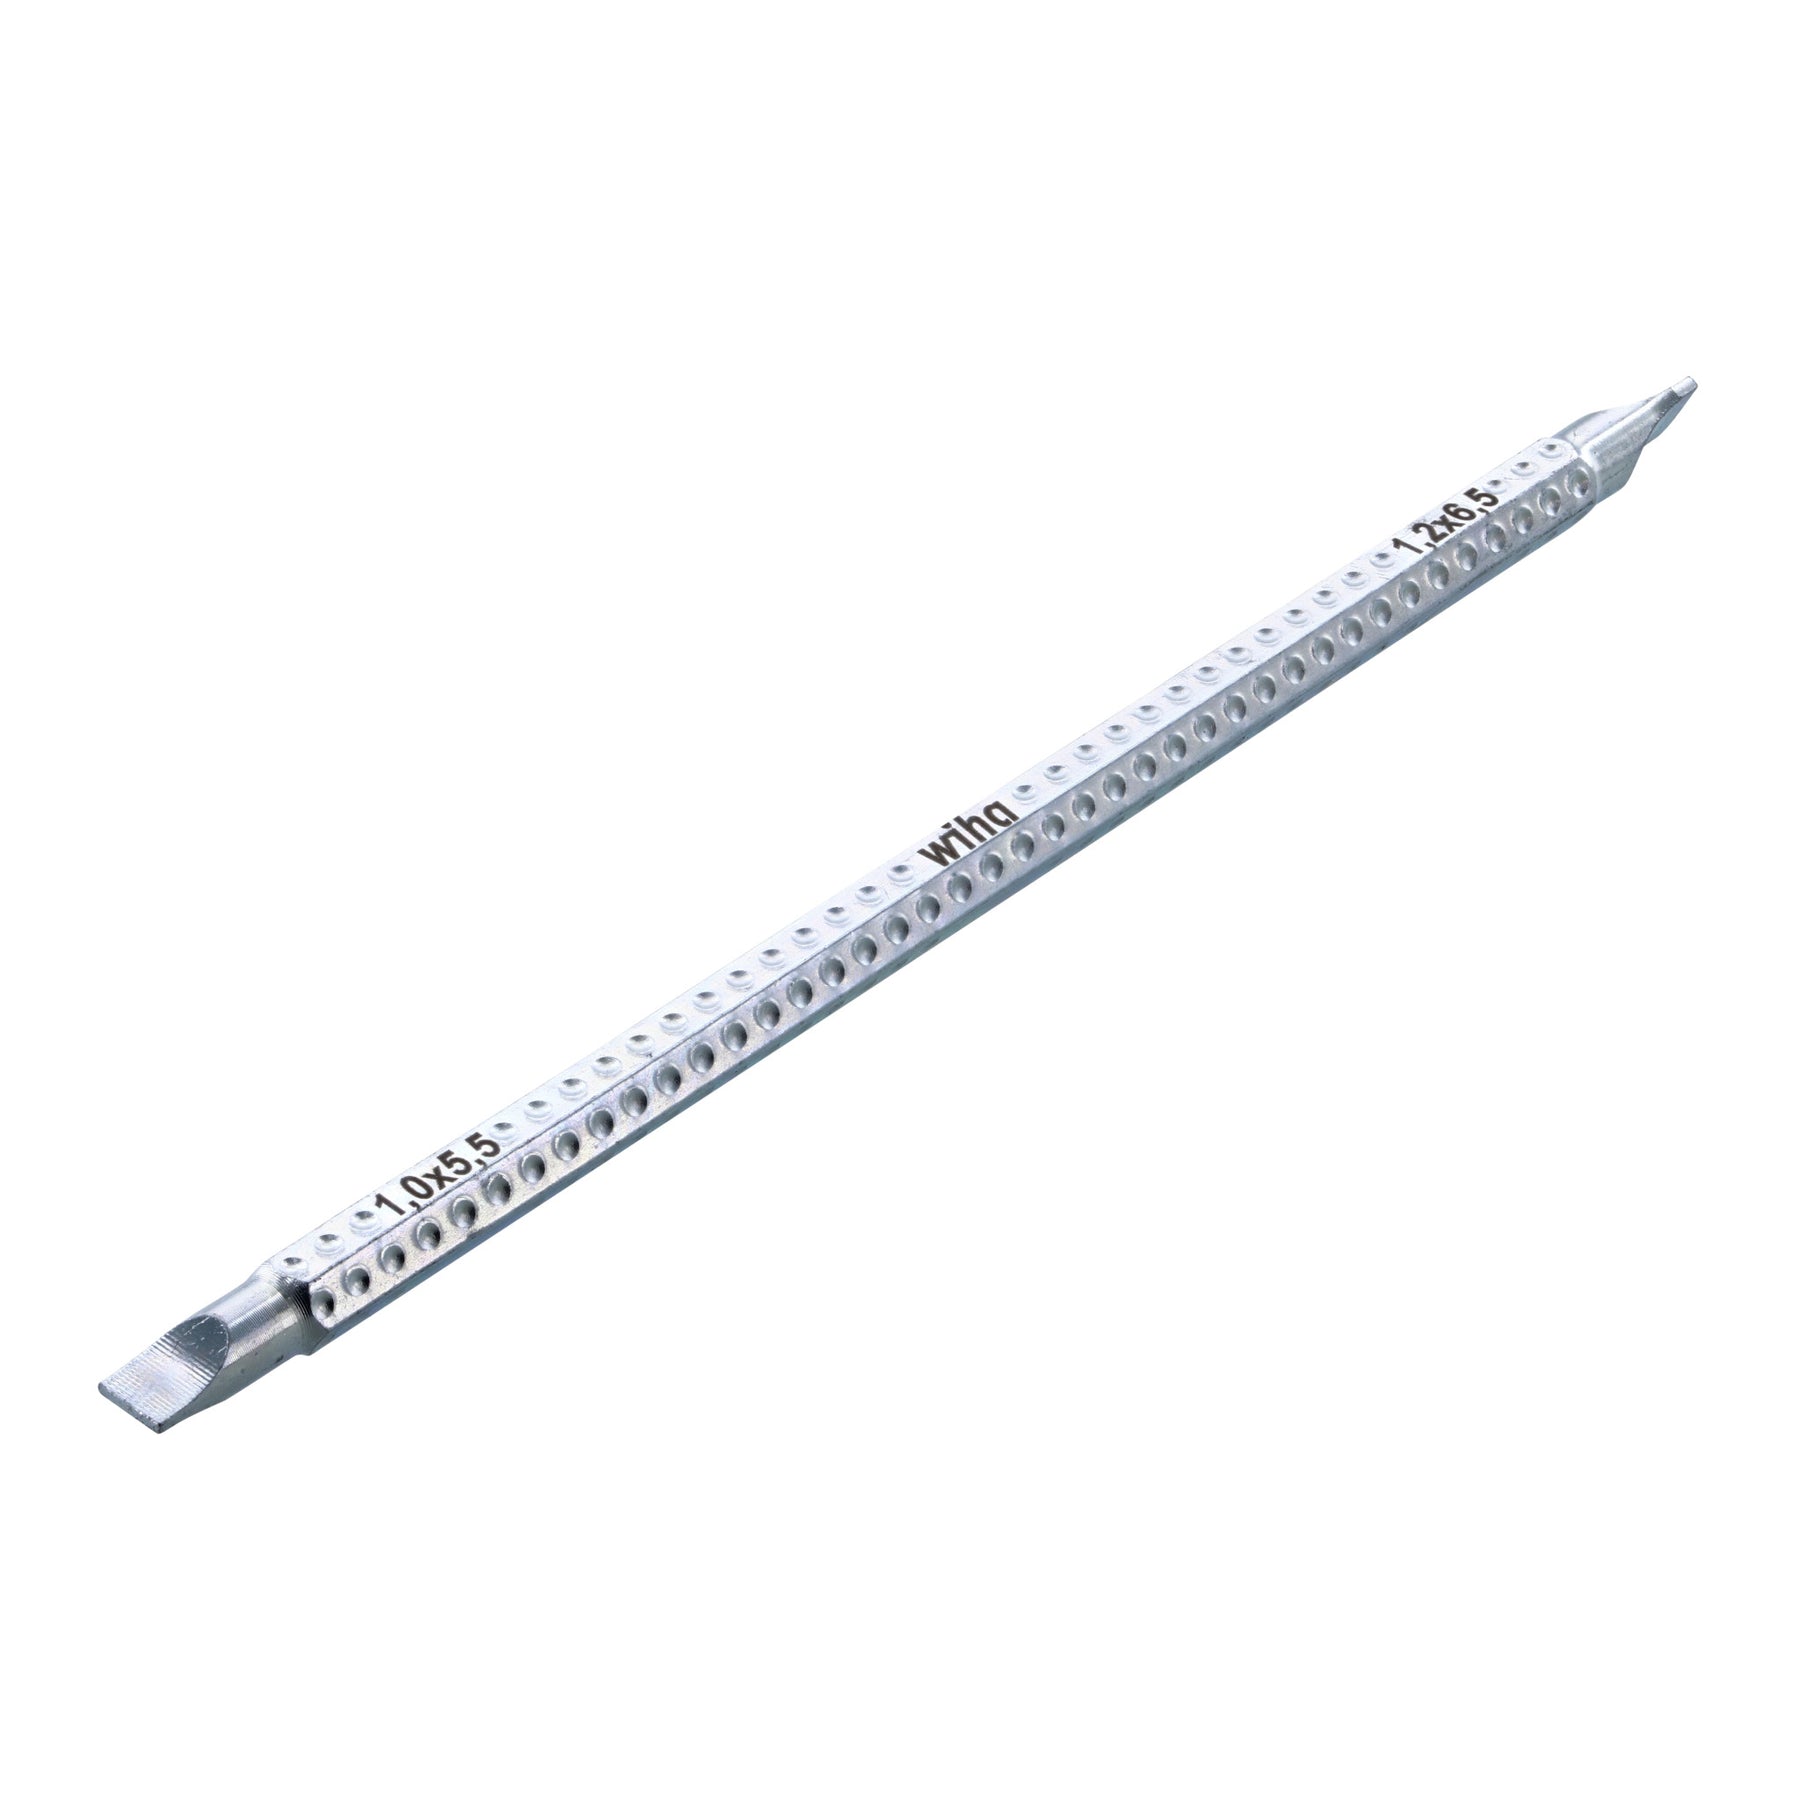 Drive-Loc VI Slotted Reversible Blade 5.5mm x 6.5mm